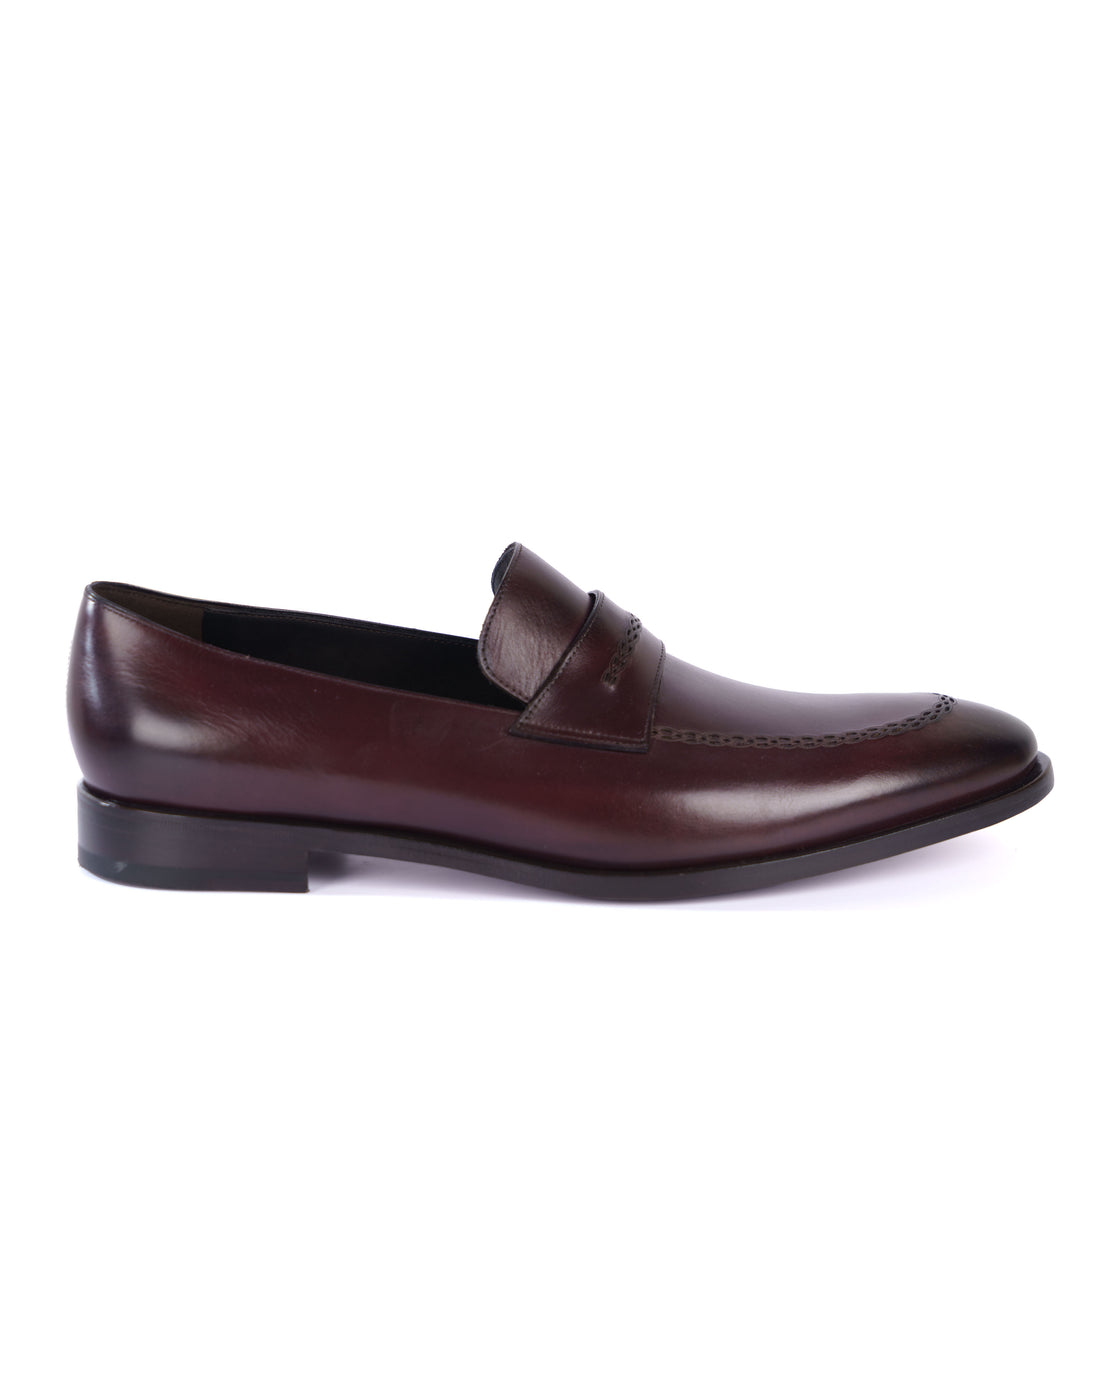 Brown Loafer Shoes